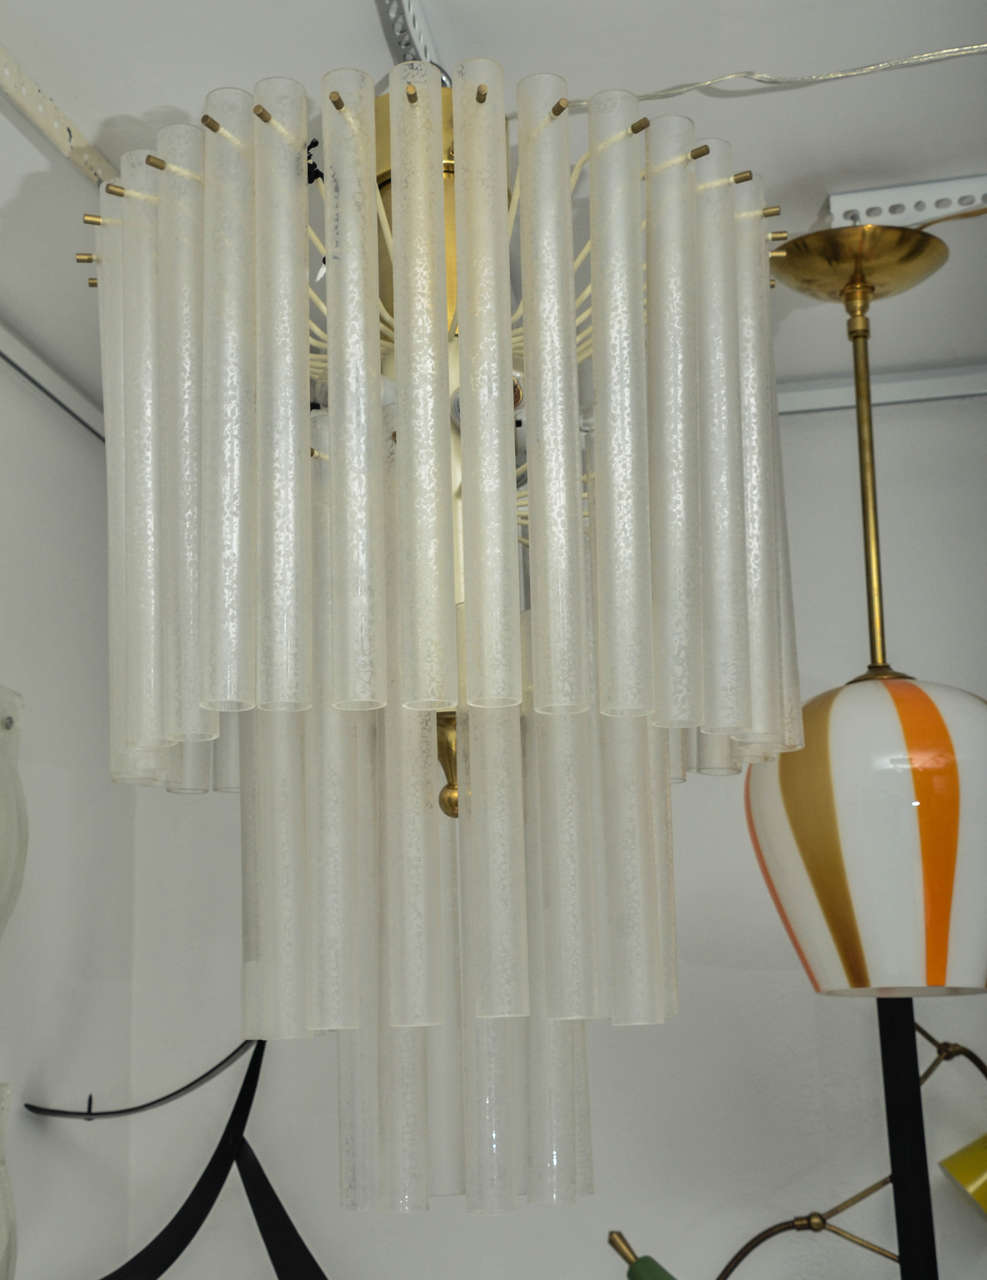 Three-tier chandelier composed of multiple frosted glass tubes, with brass details by Venini.